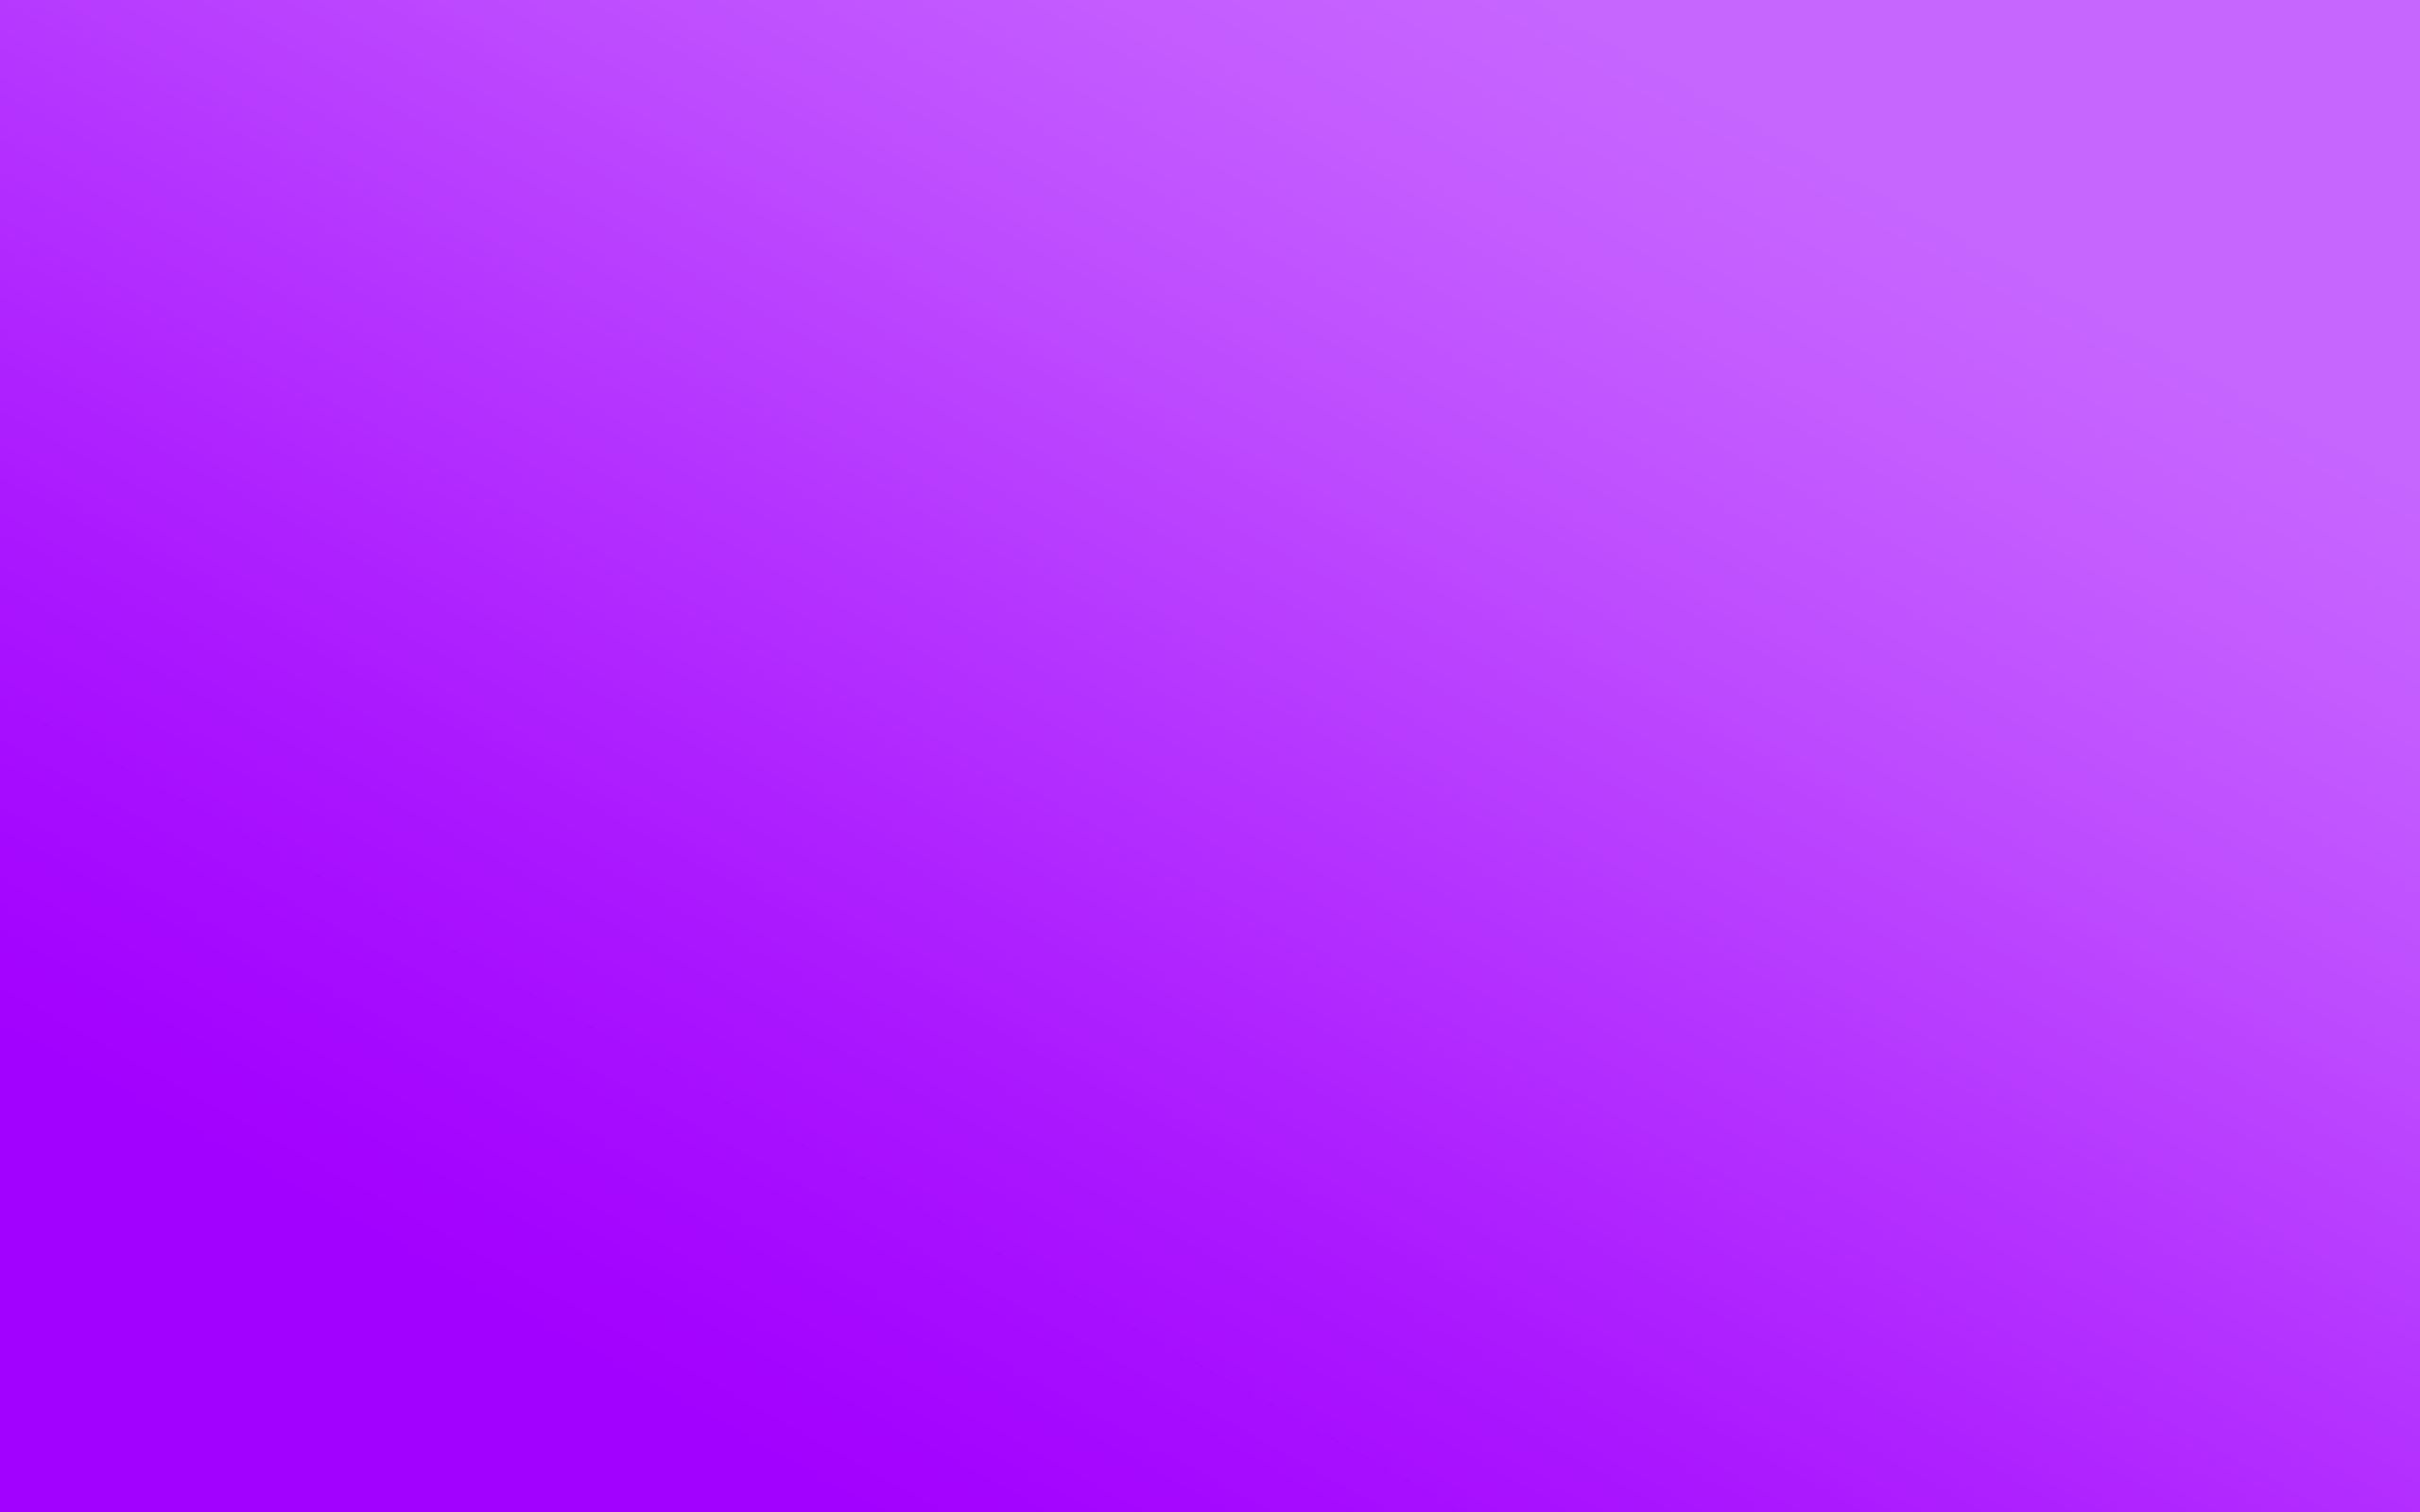 HD wallpaper background, bright, abstract, lilac, light, light coloured, solid